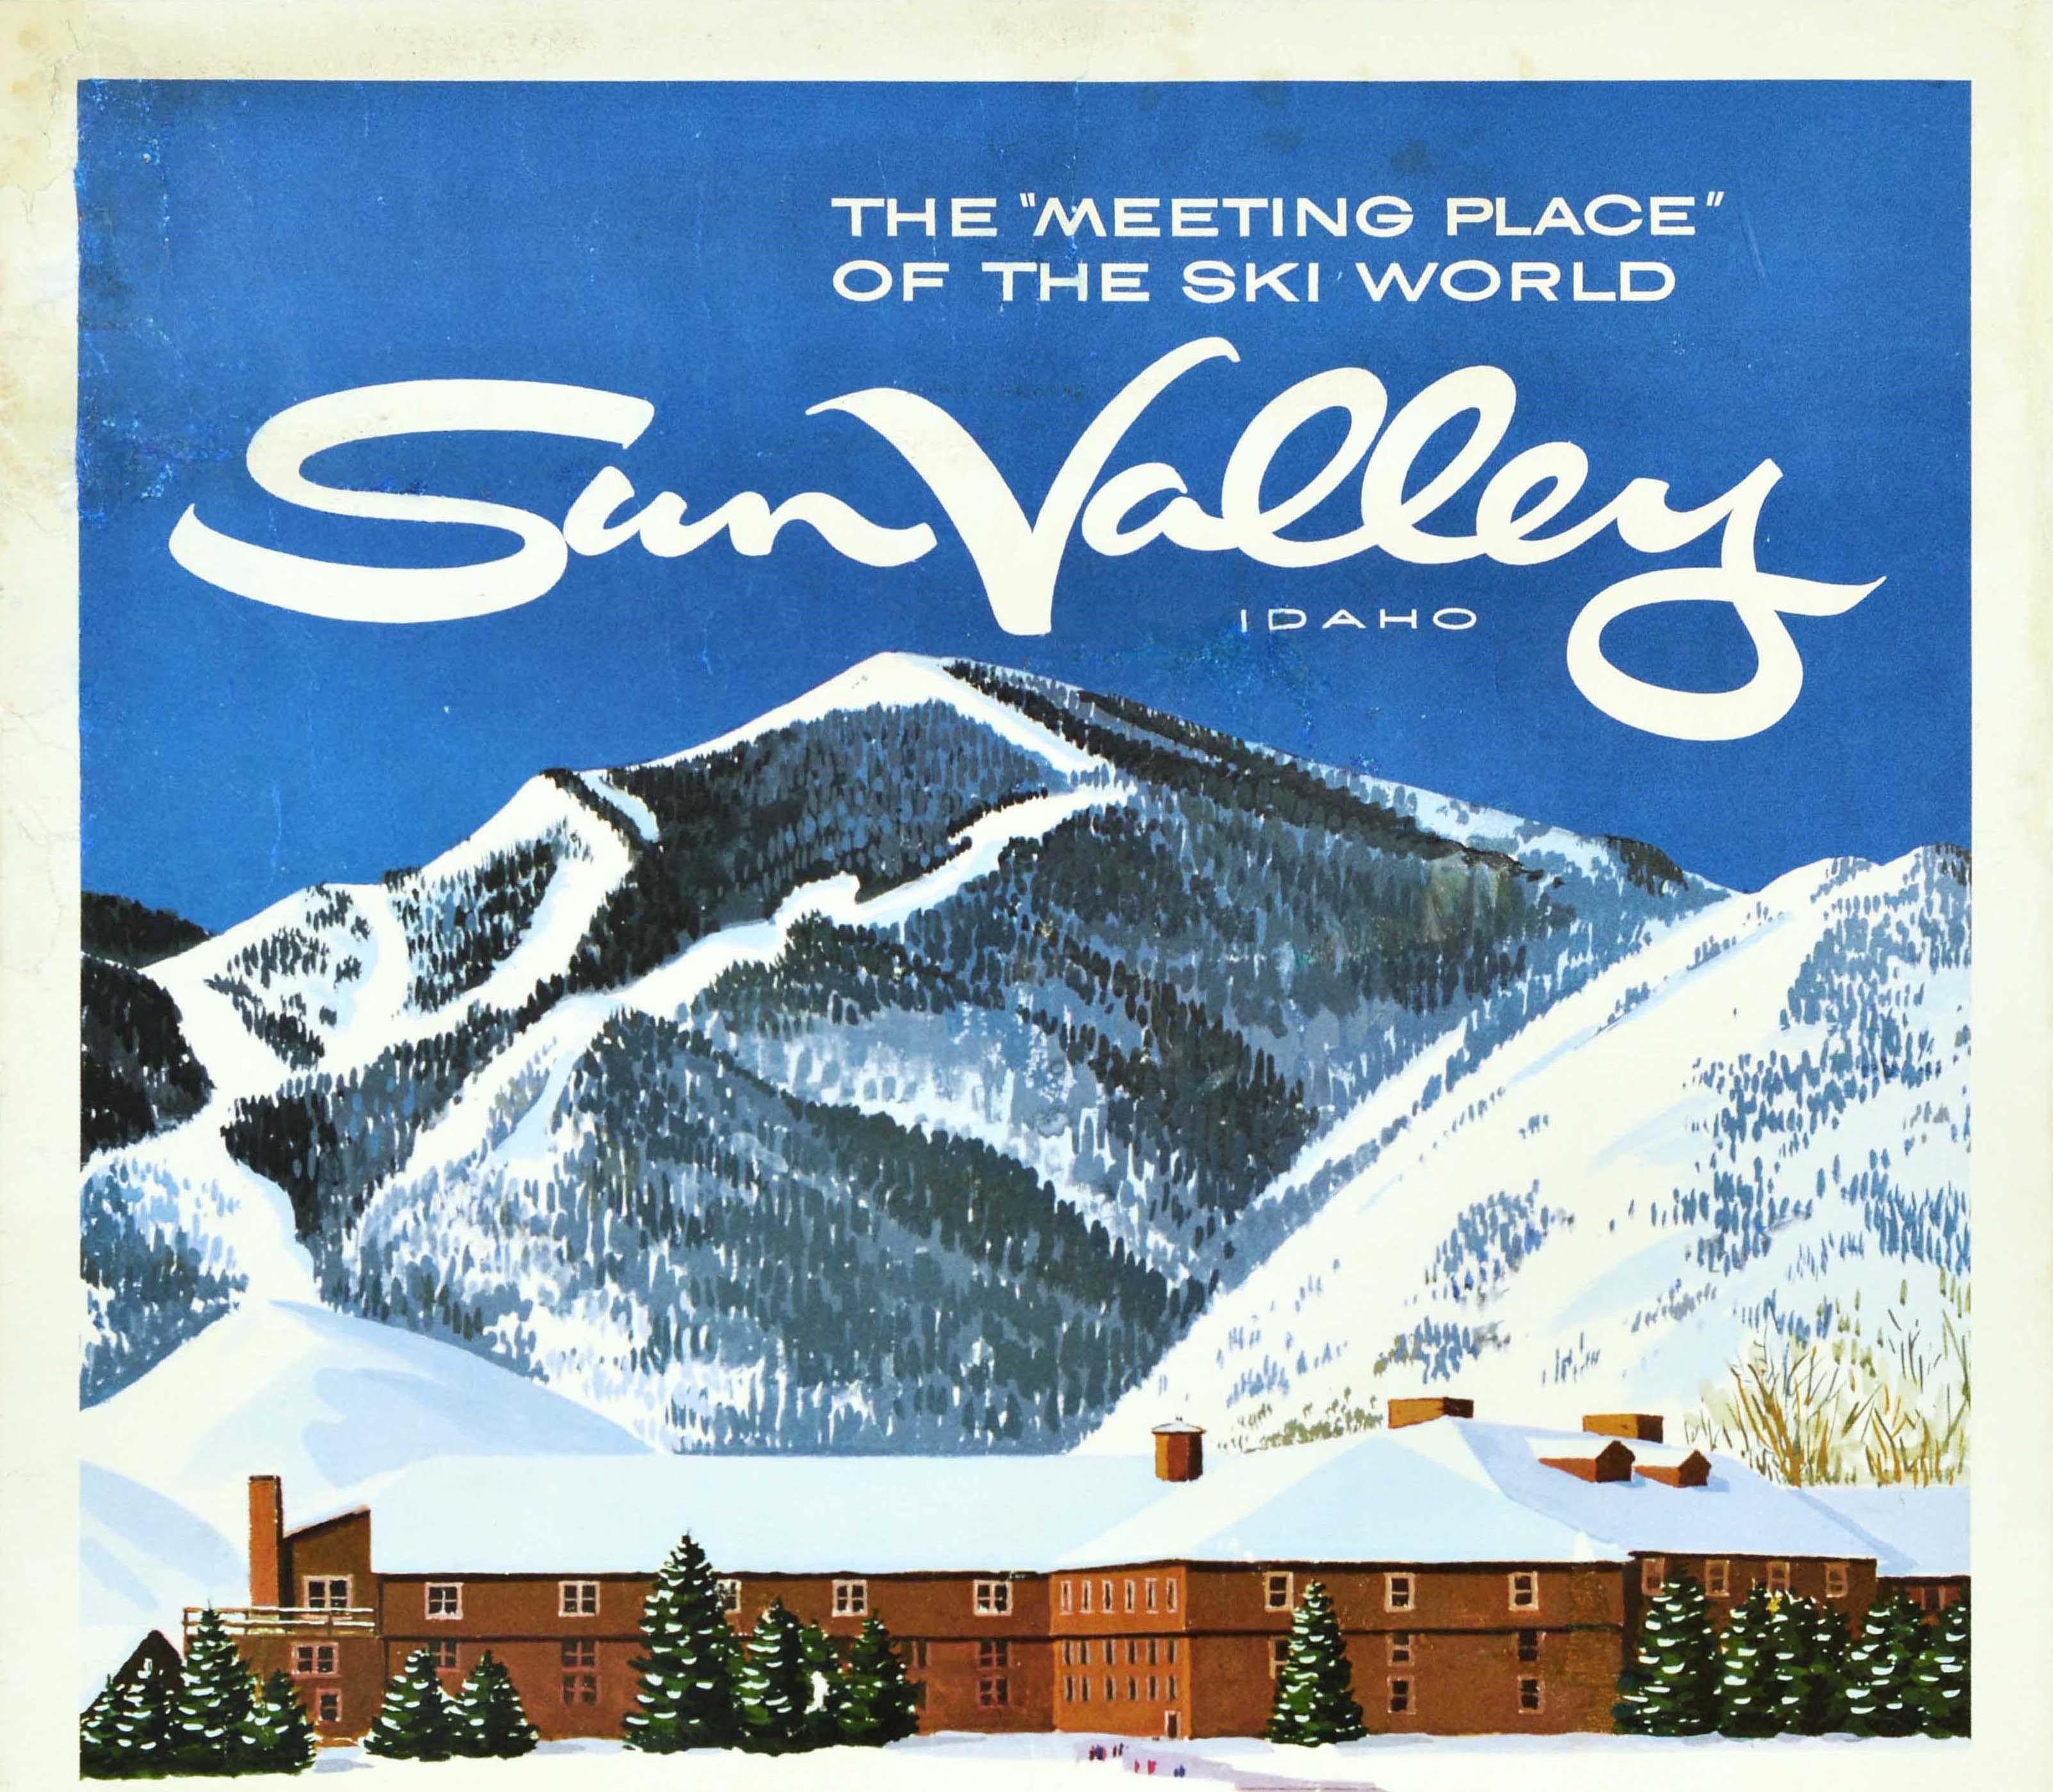 Original vintage winter sport travel poster for Sun Valley Idaho The Meeting Place of the Ski World featuring an image of a smiling couple in the foreground, skiers carrying skis on their shoulders and more holidaymakers by buses in front of the